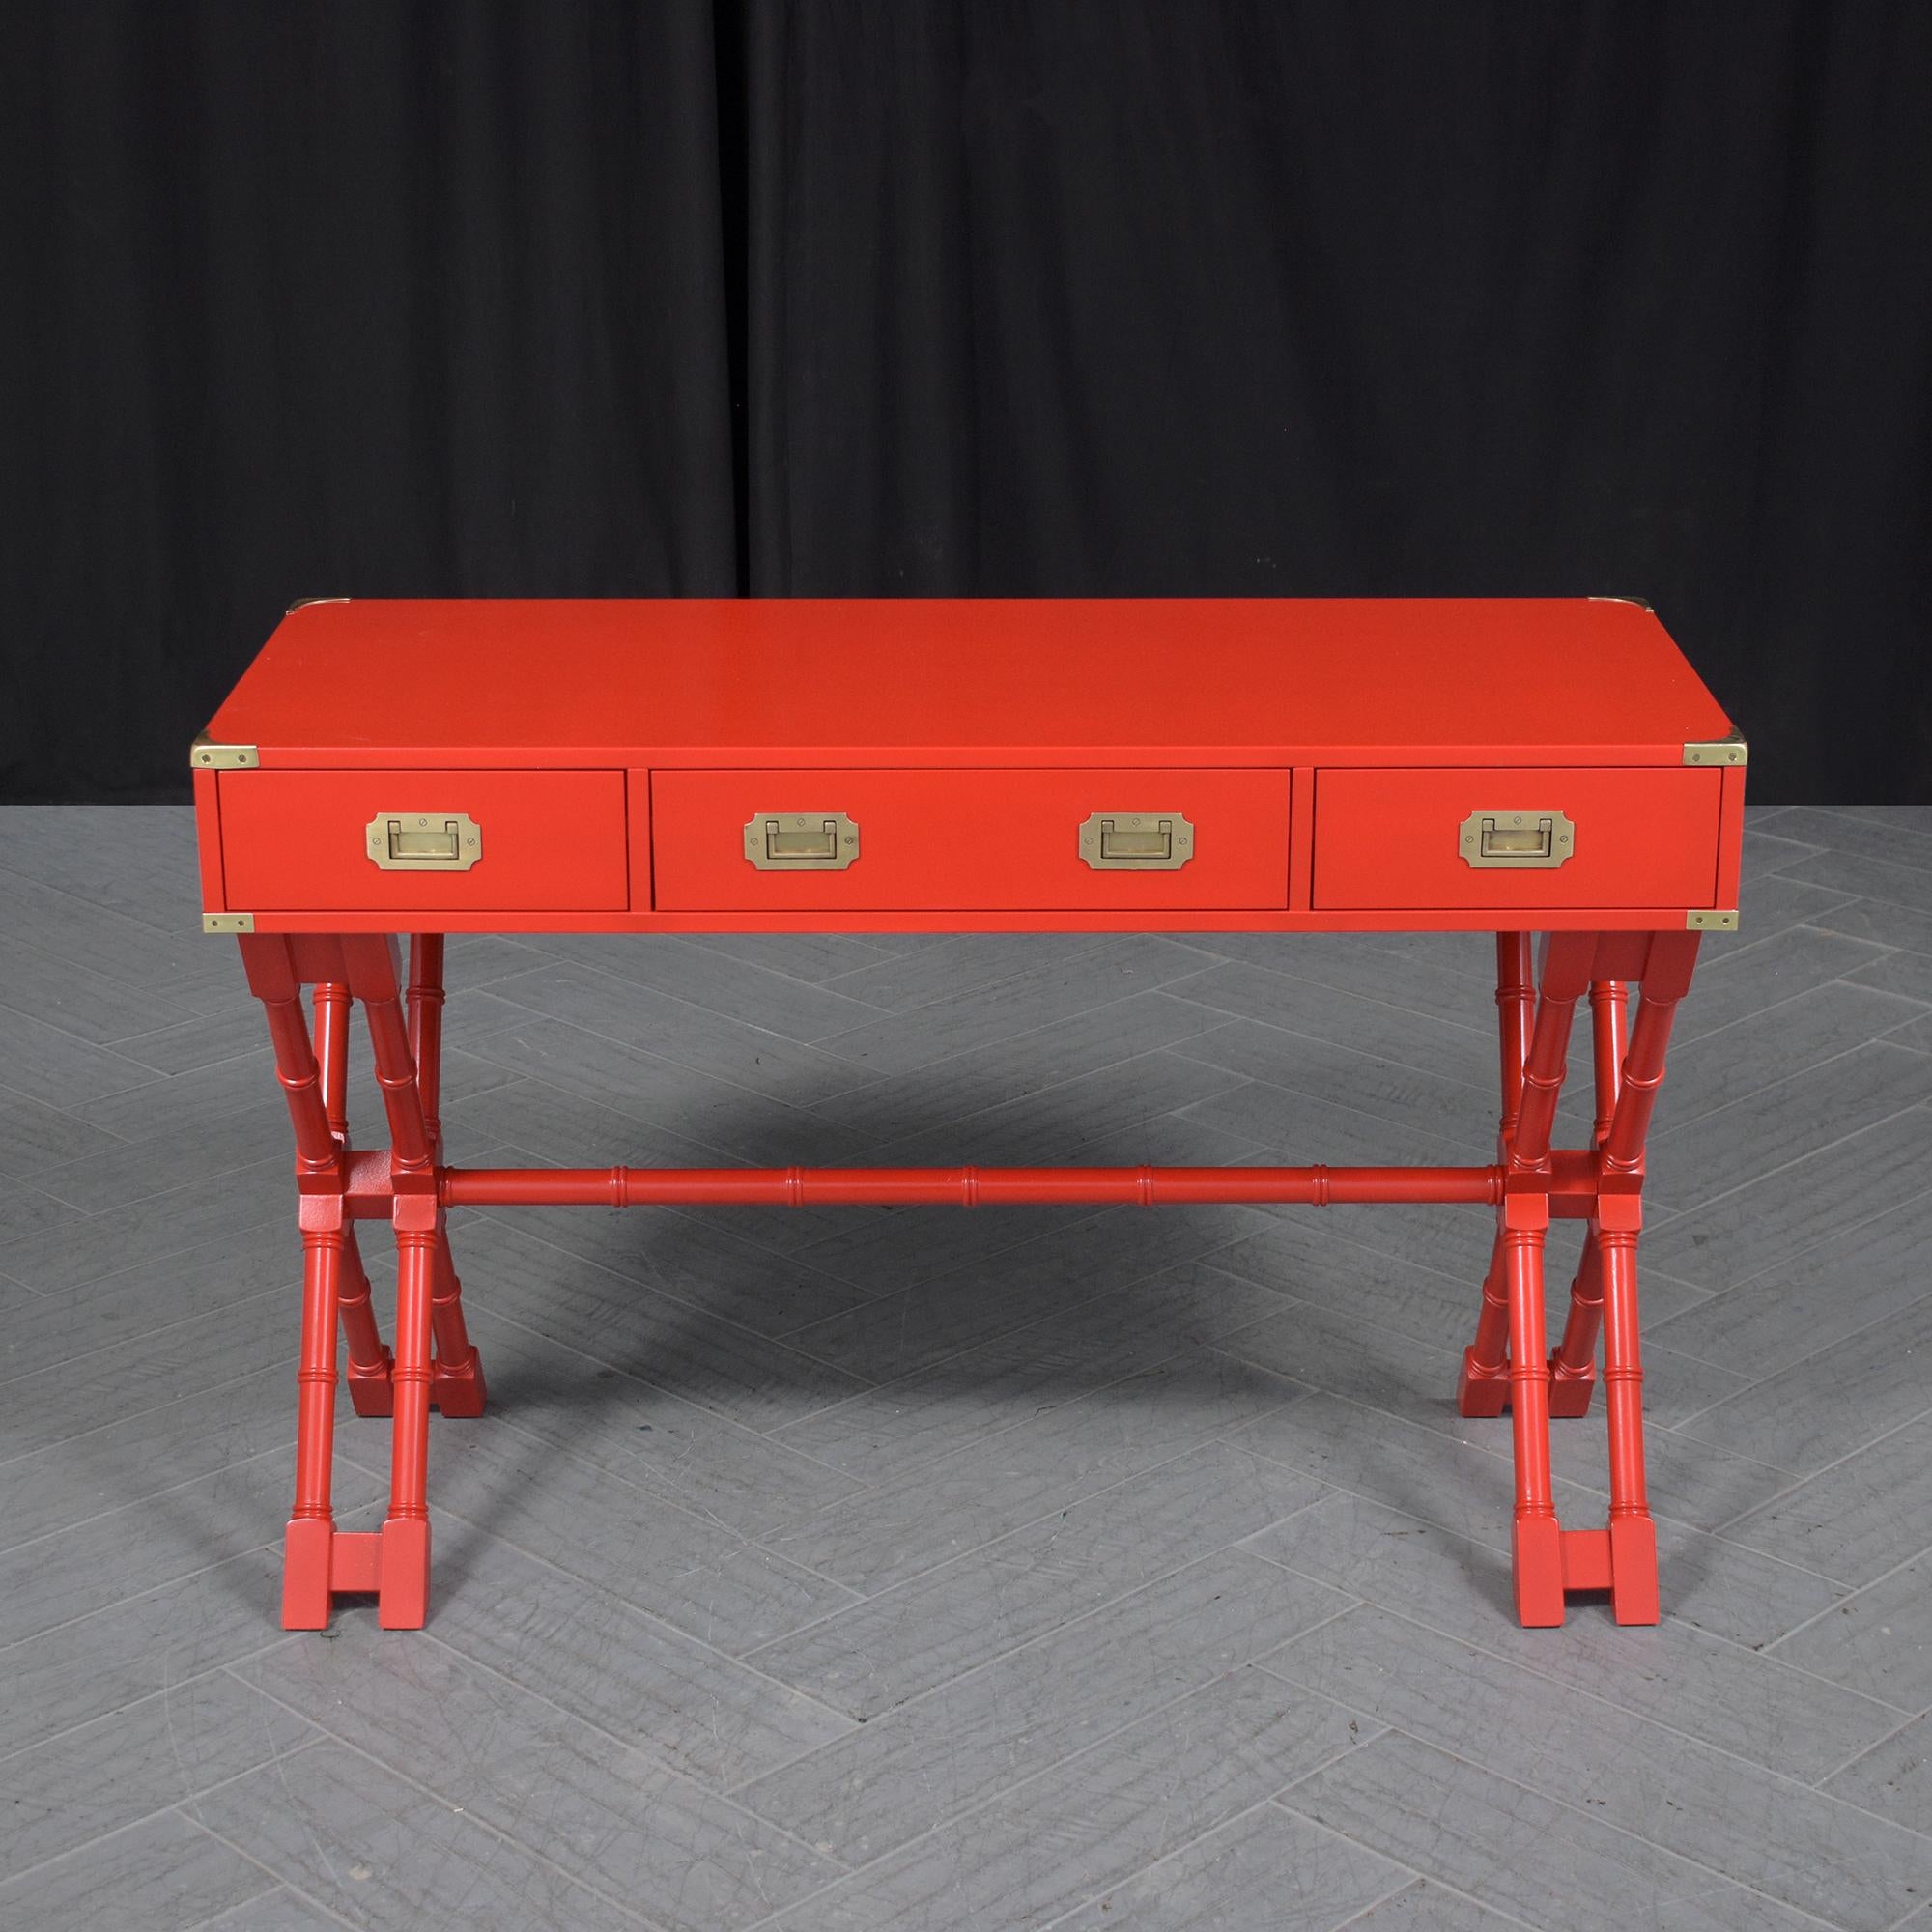 Enhance your work or home office with our stunning 21st-century campaign desk, beautifully restored and refinished by our professional craftsman team. This desk is a perfect blend of style and functionality, featuring a vivid custom red color that